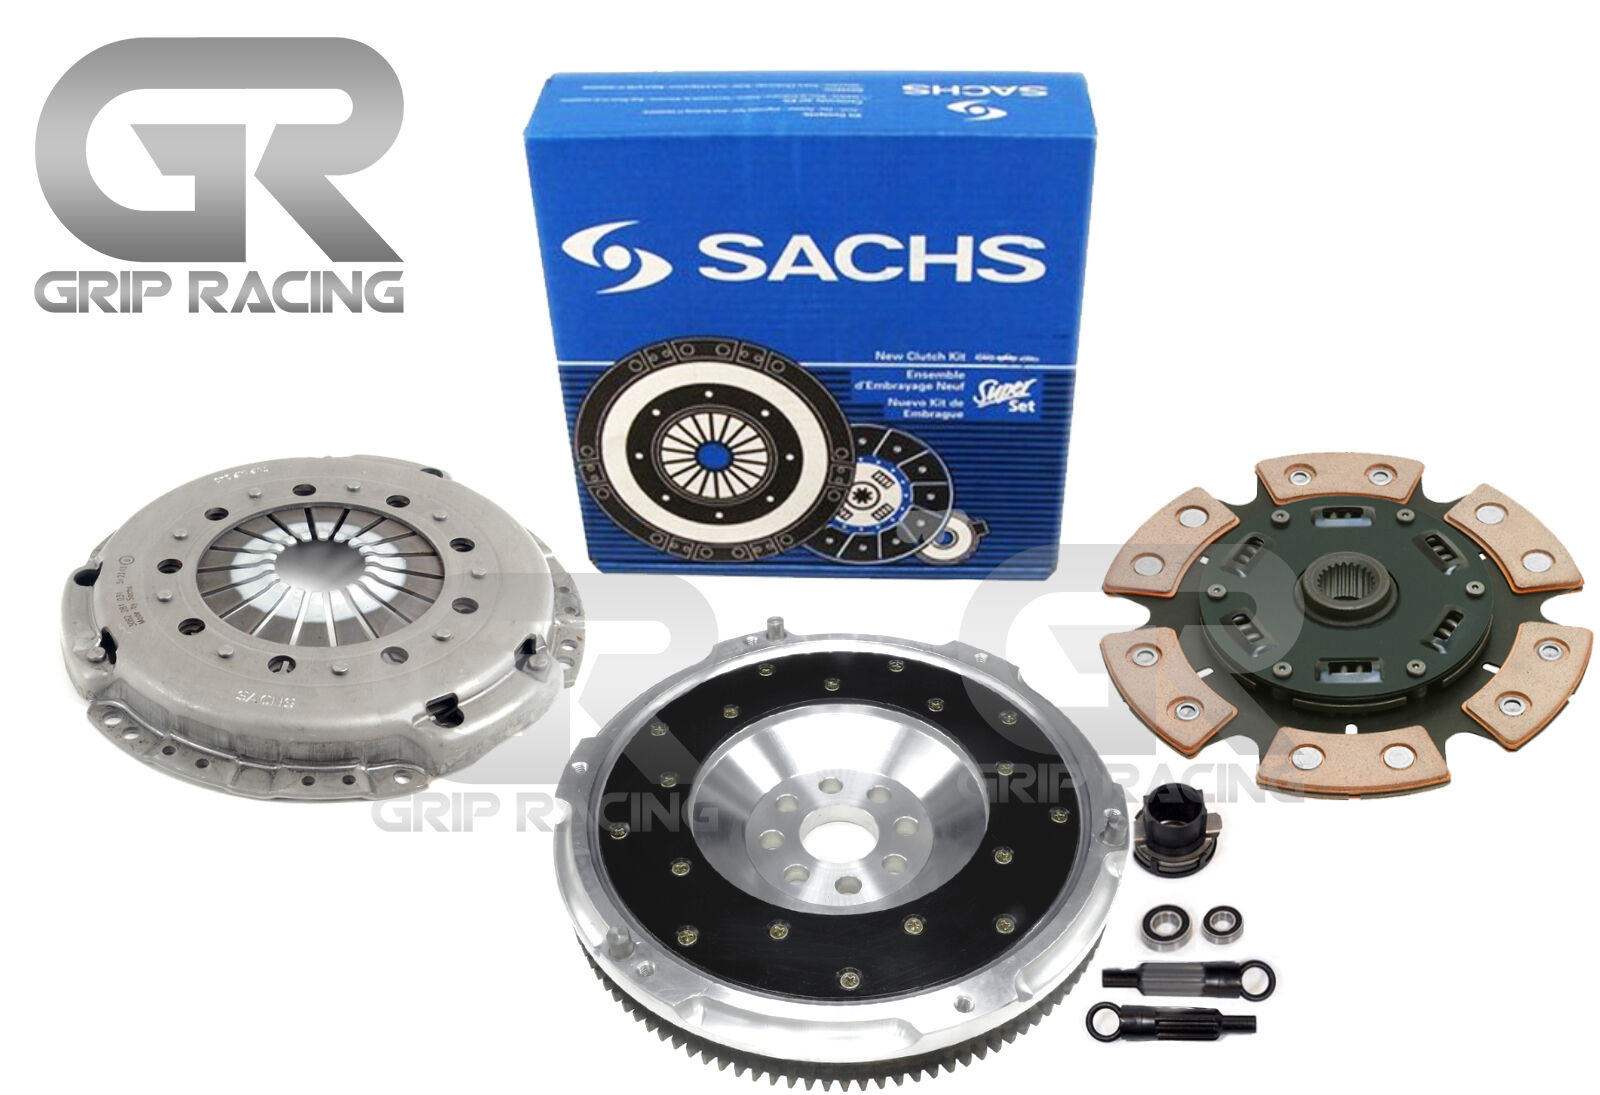 SACHS STAGE 3 HD RACING CLUTCH KIT ALUMINUM FLYWHEEL For 92-95 BMW 325 i M50 E36